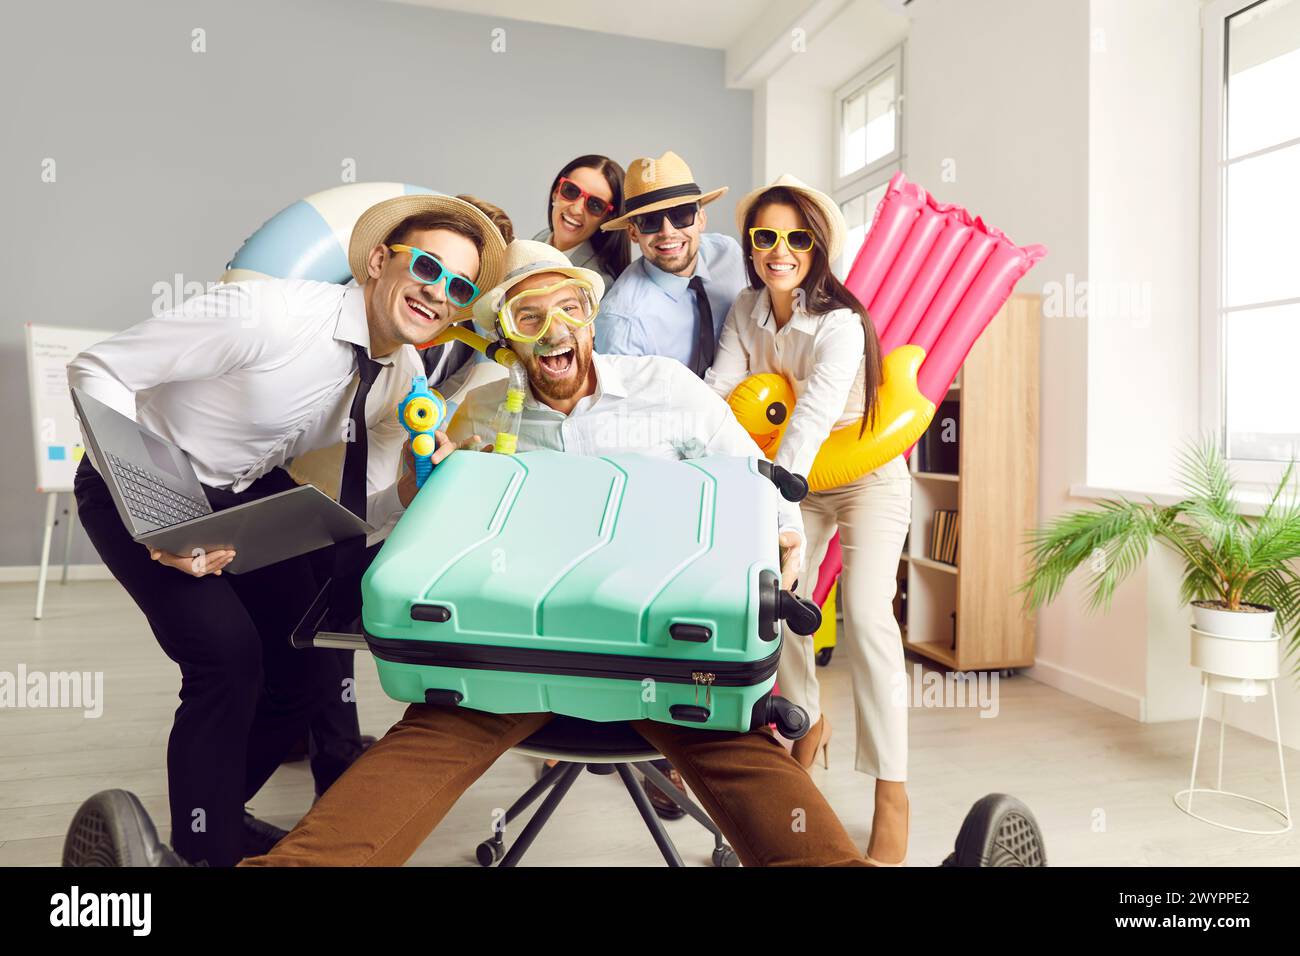 Office people holiday planning, dreaming of vacation happy leisure and recreation fun together Stock Photo